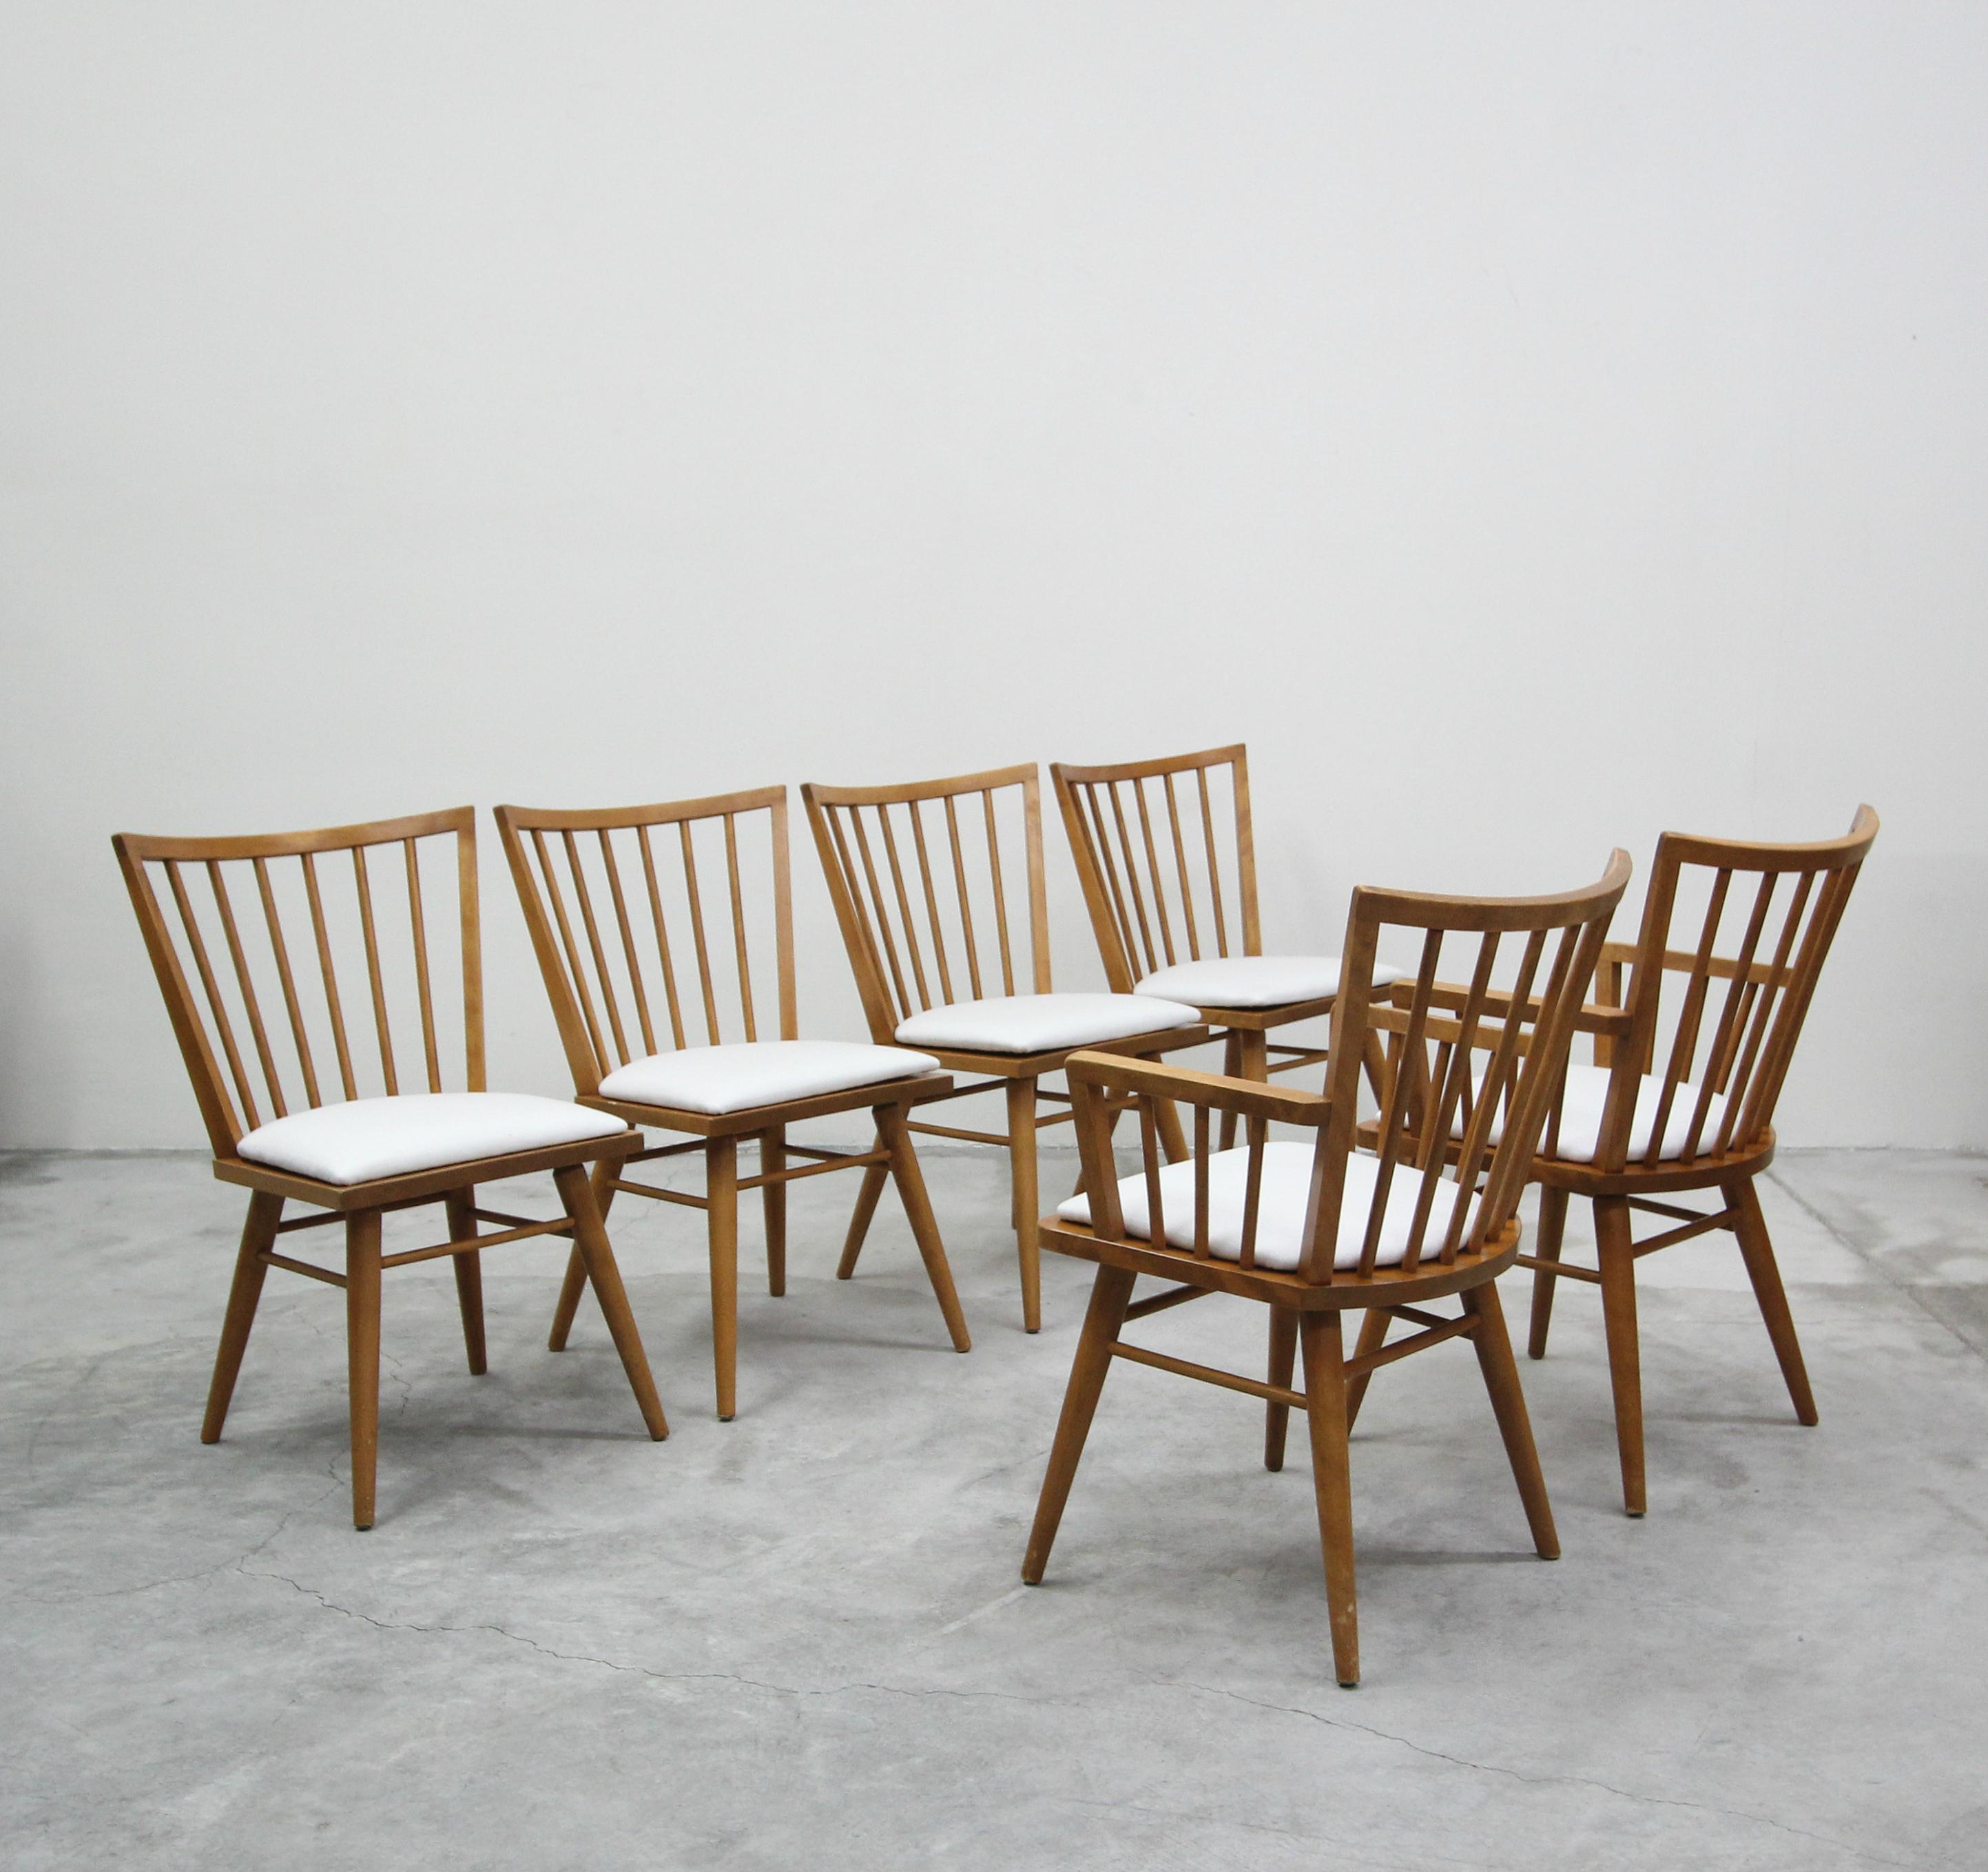 Beautiful set of six midcentury spindle back dining chairs by Conant Ball, designed by Leslie Diamond. These chairs have a very clean, minimalist design and their solid, maple construction, makes them stylish and durable.

Chairs are in excellent